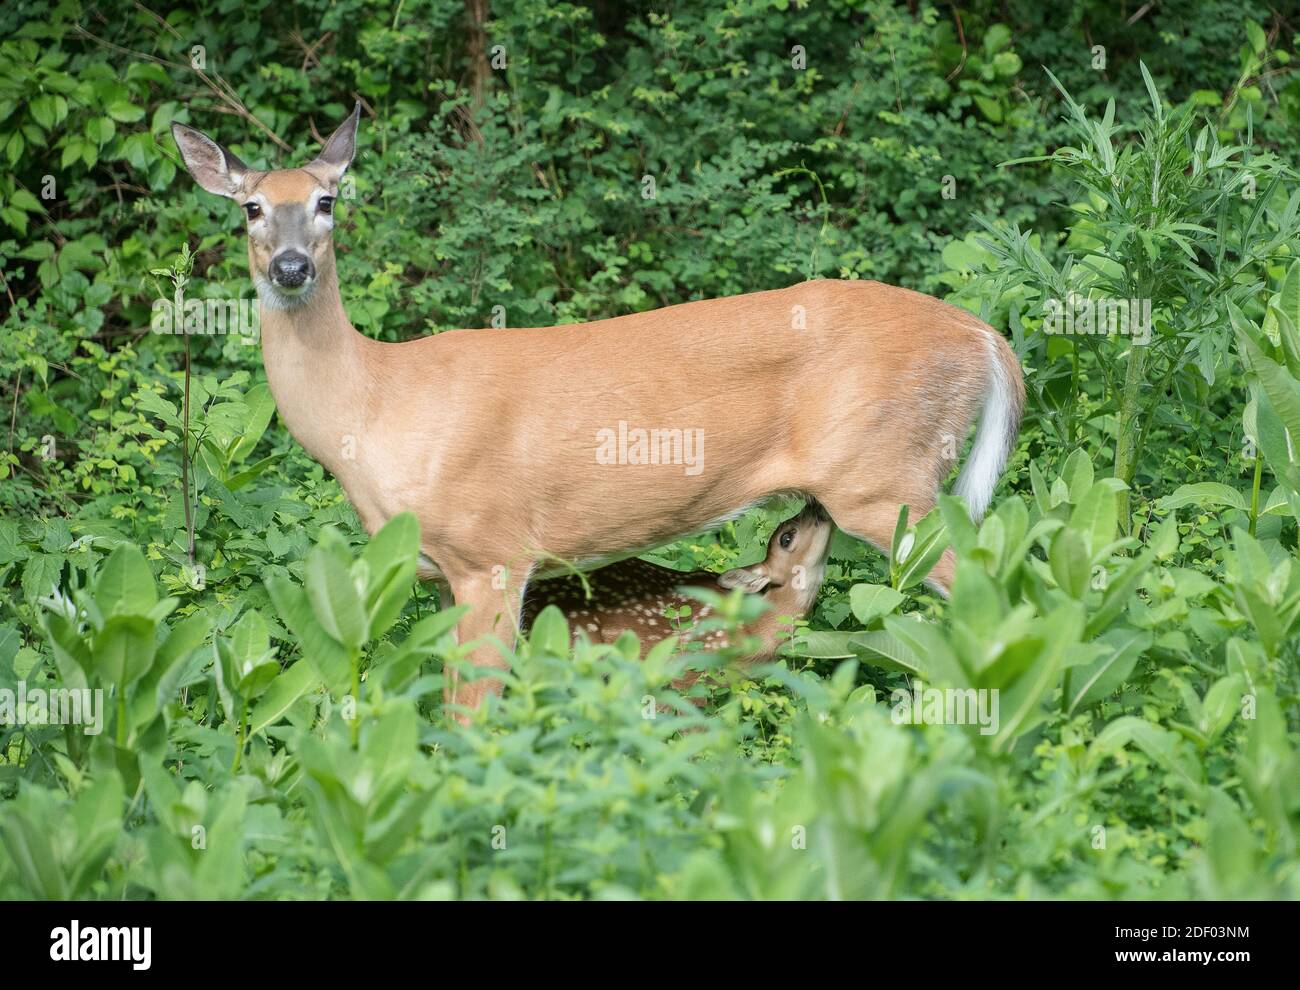 A doe, white-tailed deer nurses a fawn amidst tall plants found along the forests that border Skyline Drive, part of the Shenandoah National Park in V Stock Photo